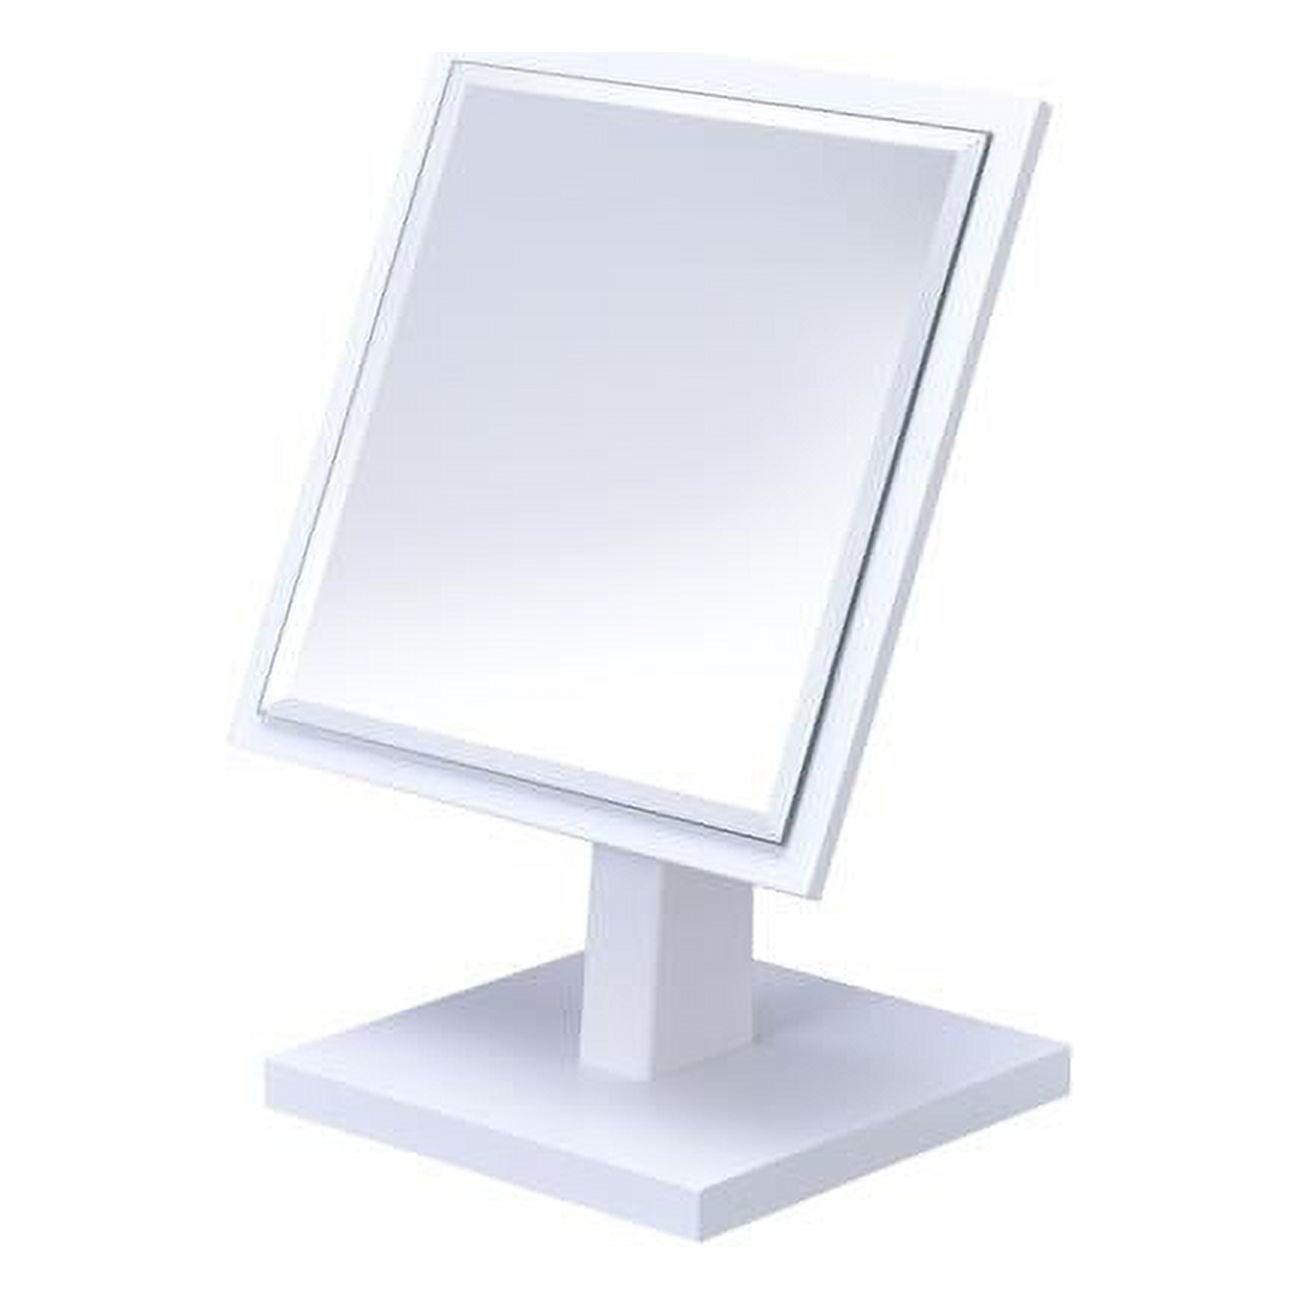 Chic Winter White Square Countertop Vanity Mirror with Wood Frame